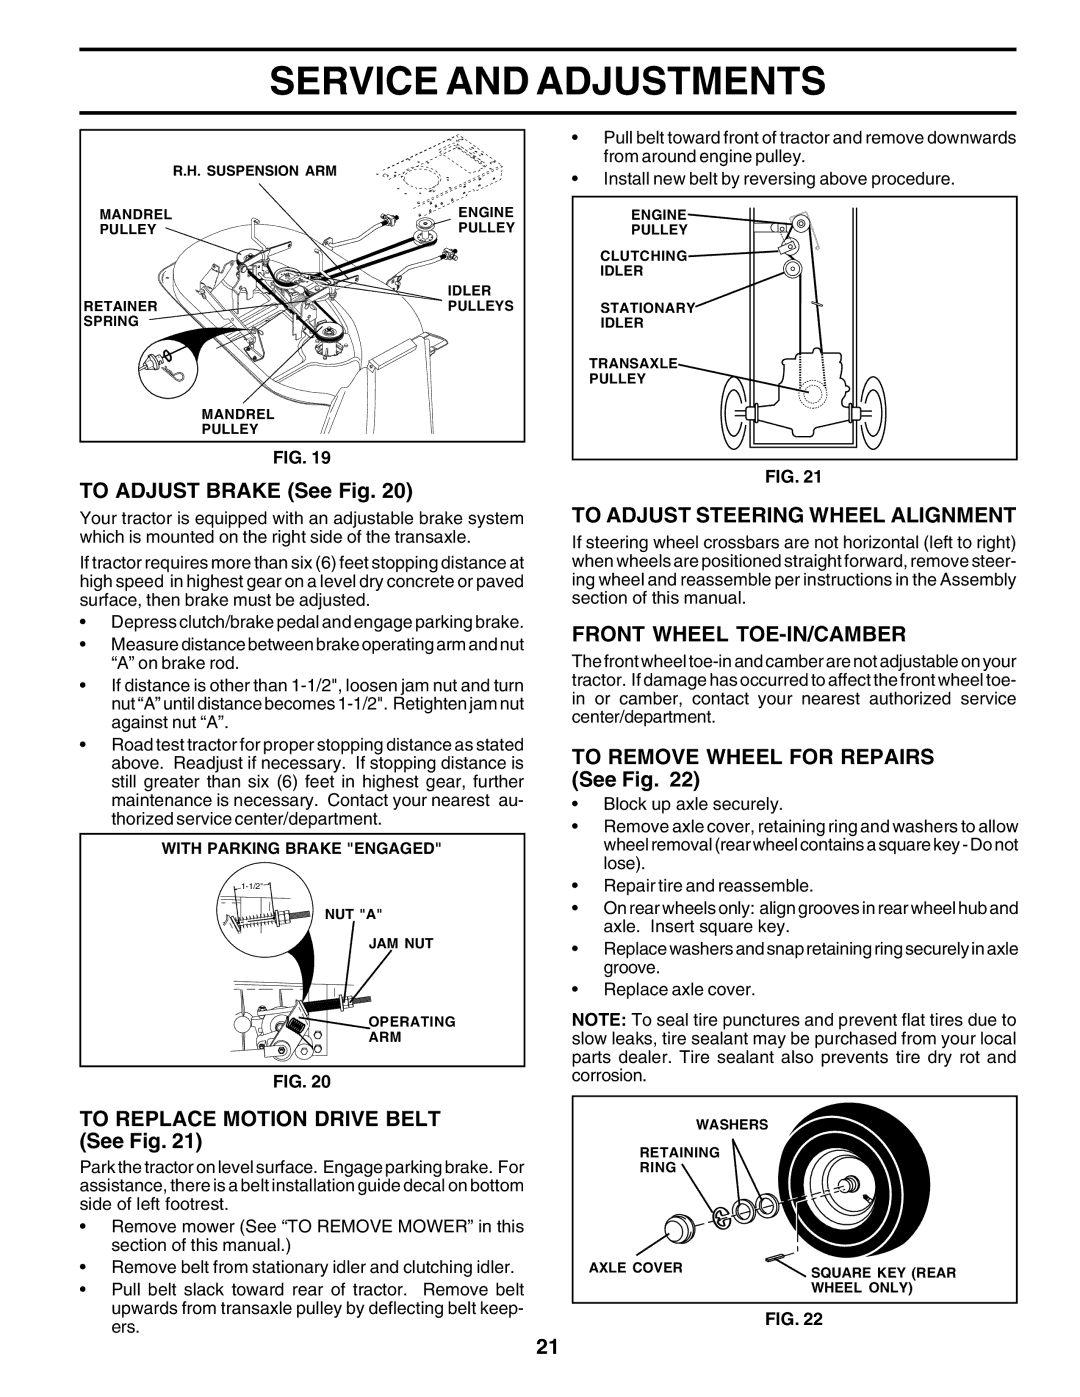 Weed Eater 183670 manual To Adjust Brake See Fig, To Replace Motion Drive Belt See Fig, To Adjust Steering Wheel Alignment 